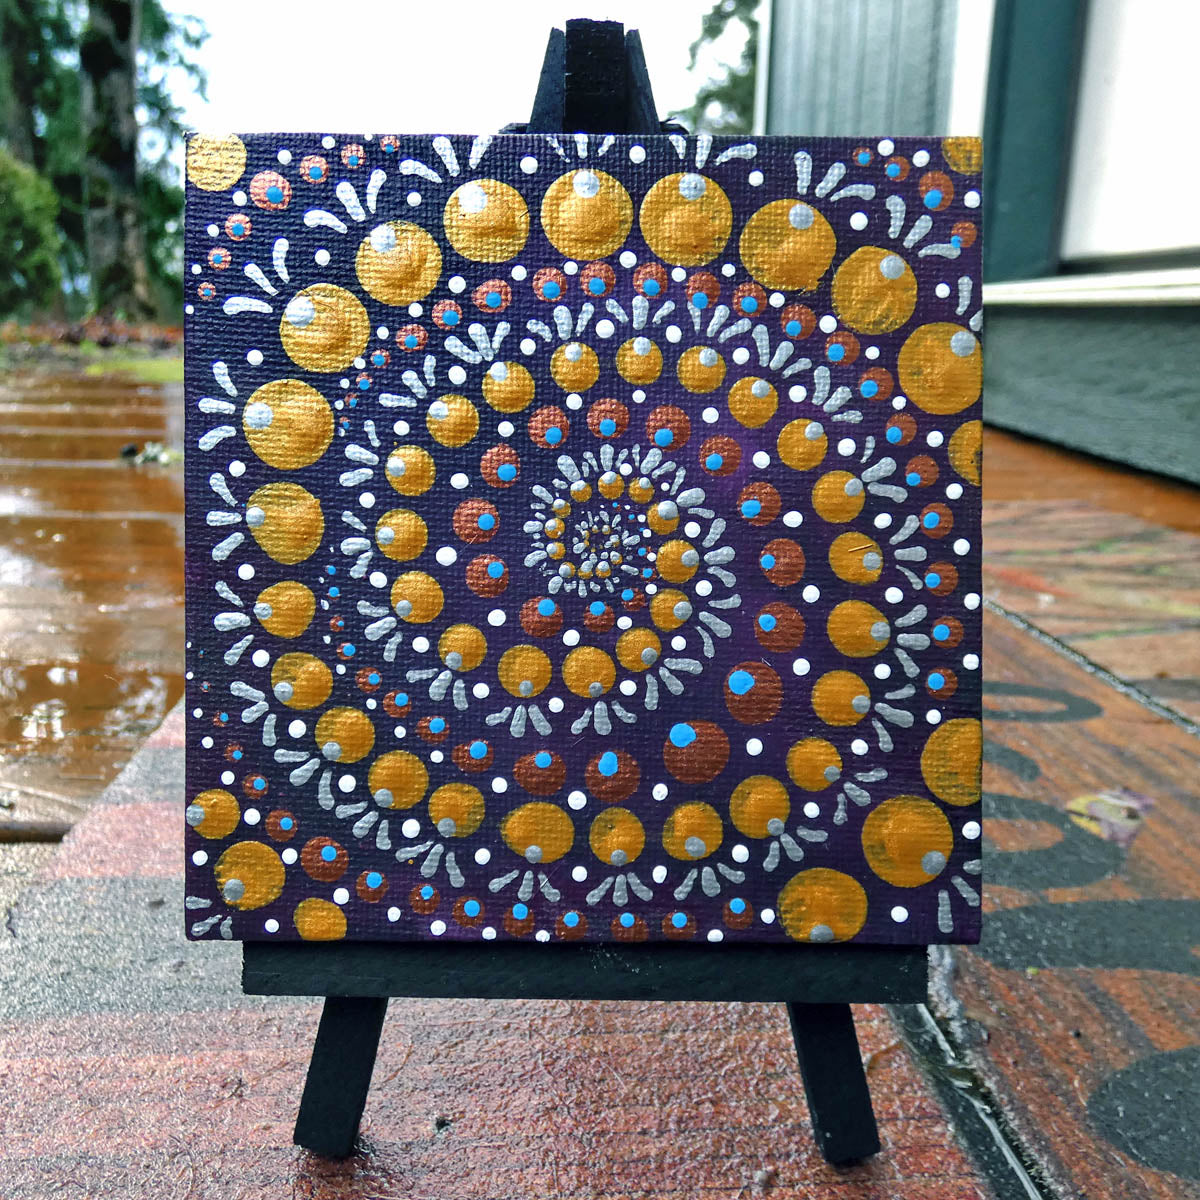 Isfahan, Mandala Dot Painted Canvas Painting by Sholee Parry